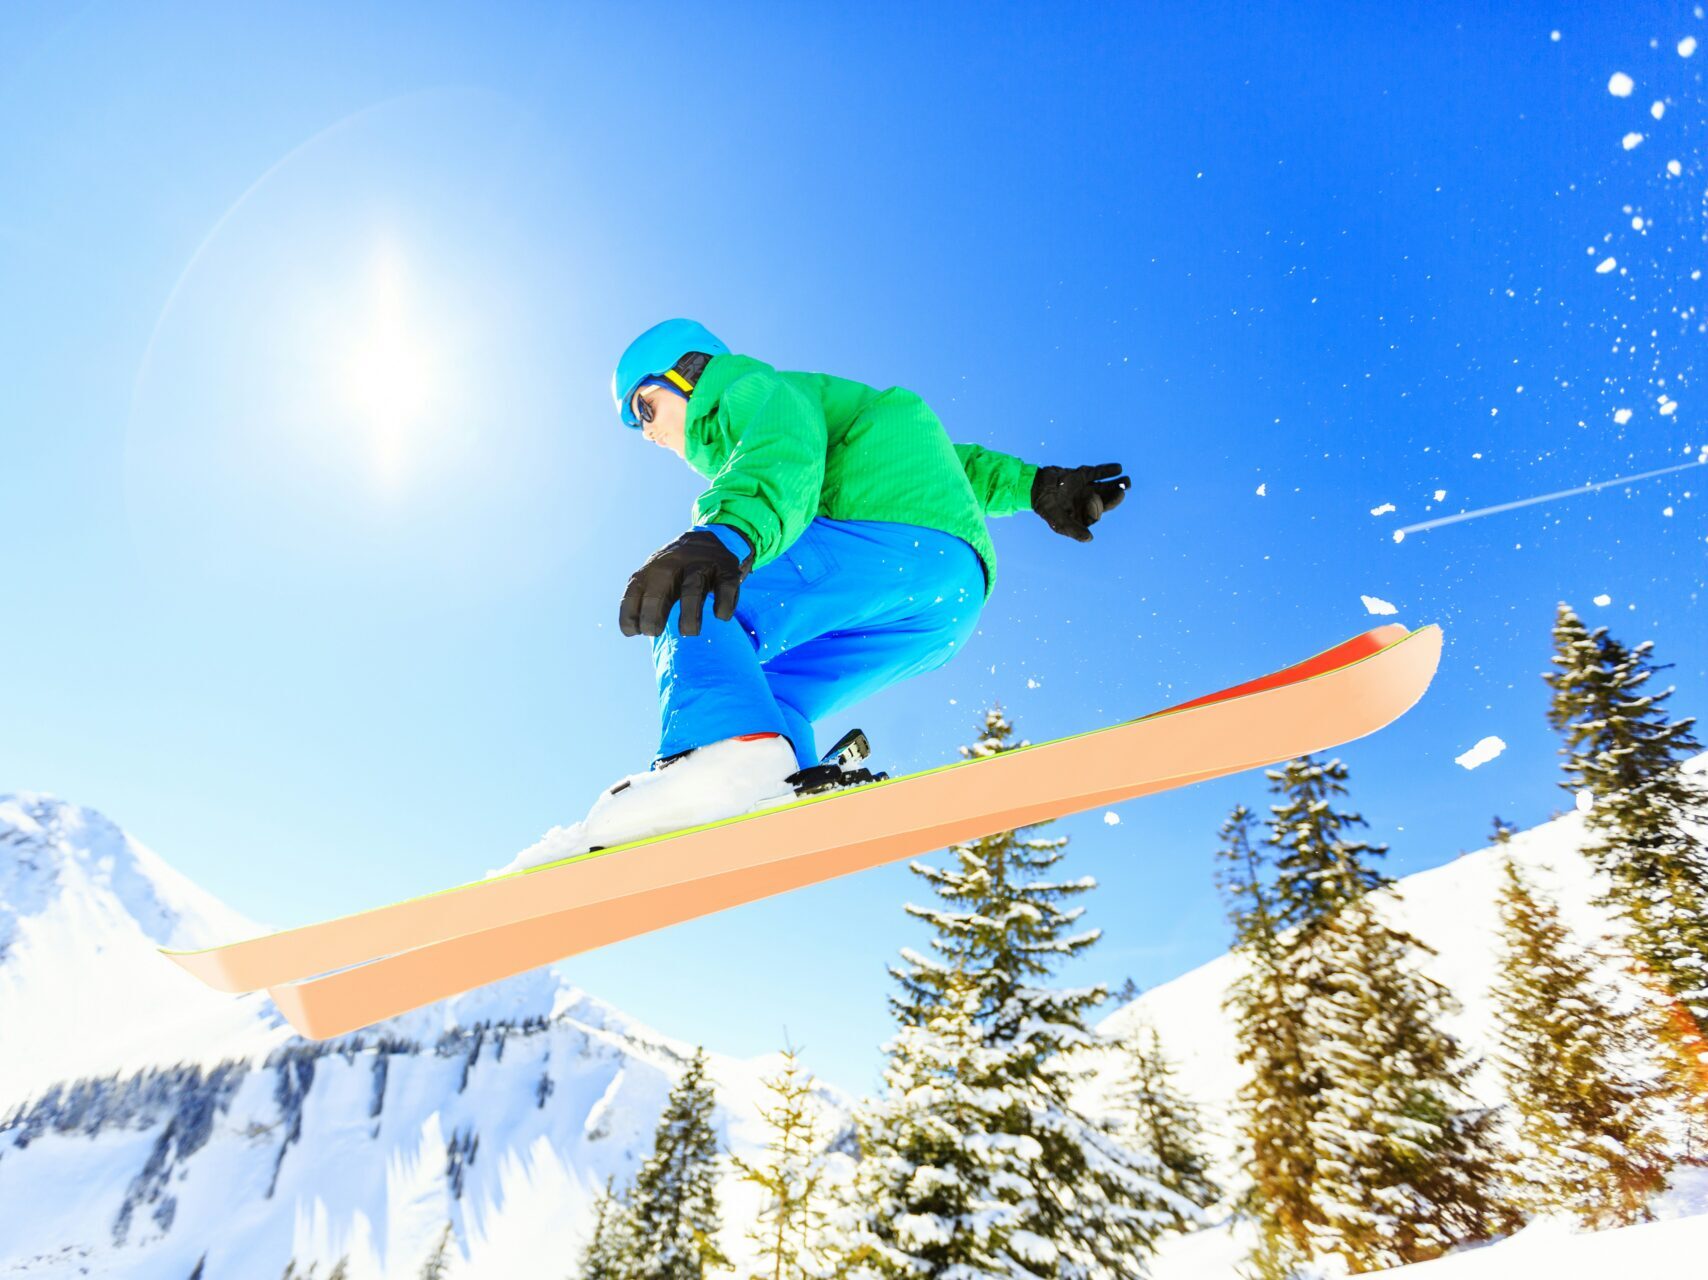 person wearing green jacket, blue ski pants and helmet making a jump wearing snow skis